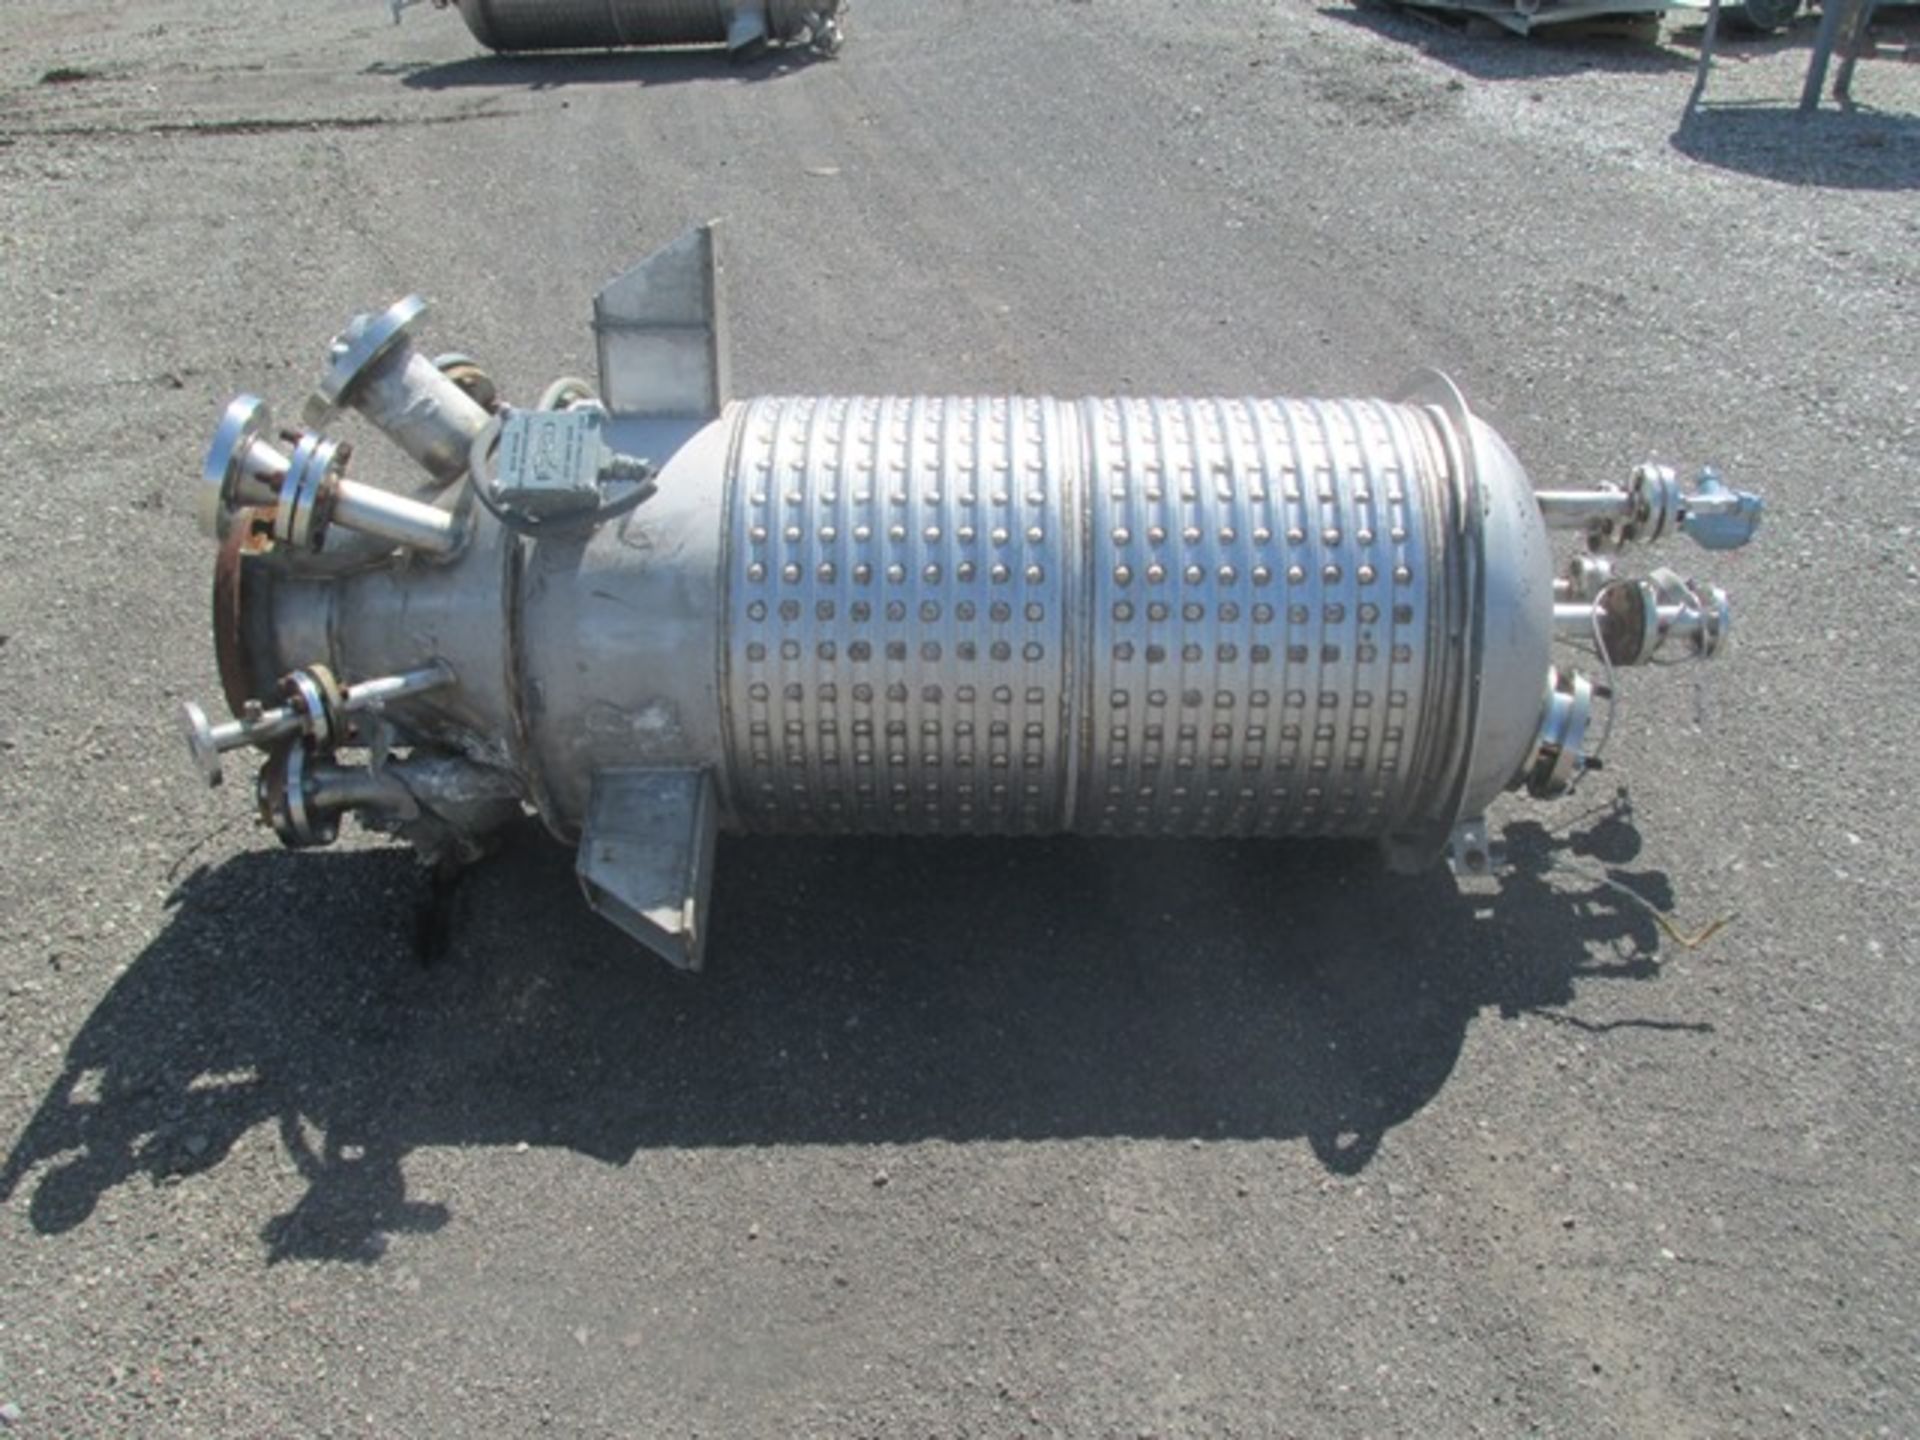 100 gallon Tolan reactor body, stainless steel construction,approx. 24" diameter x 48" straight side - Image 3 of 9